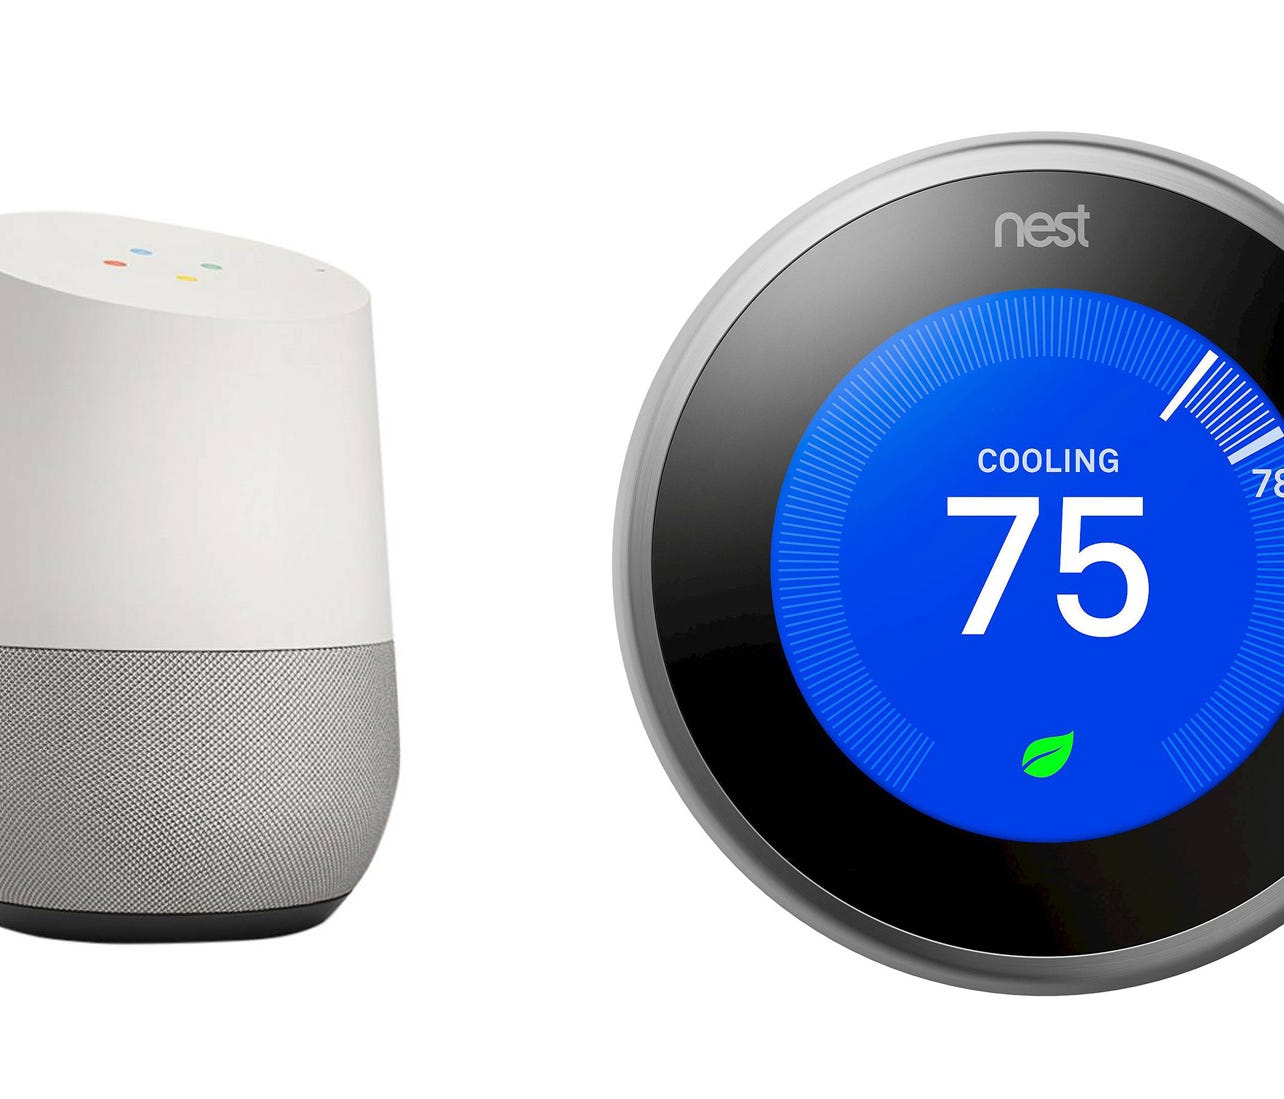 Start your smart home for less with this enticing bundle deal from Target